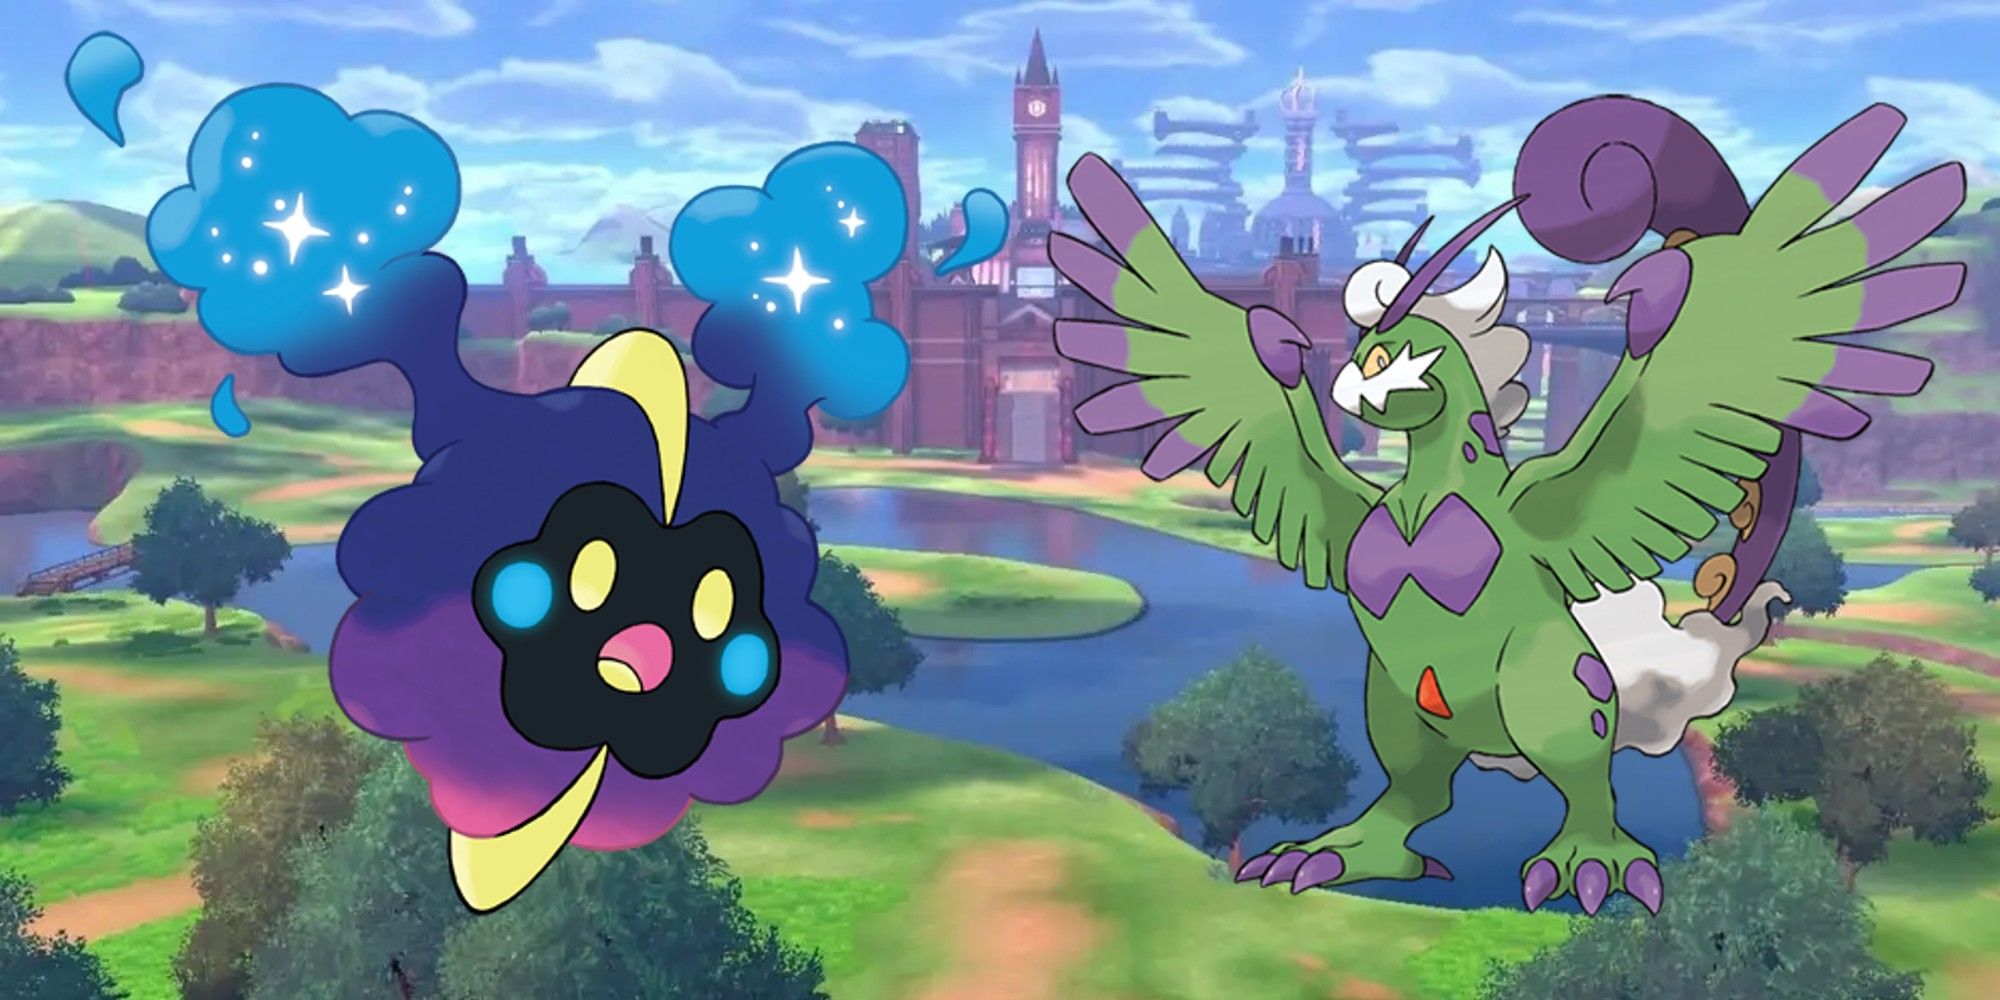 Pokemon Sword and Shield wild area with Cosmog and Tornadus over it